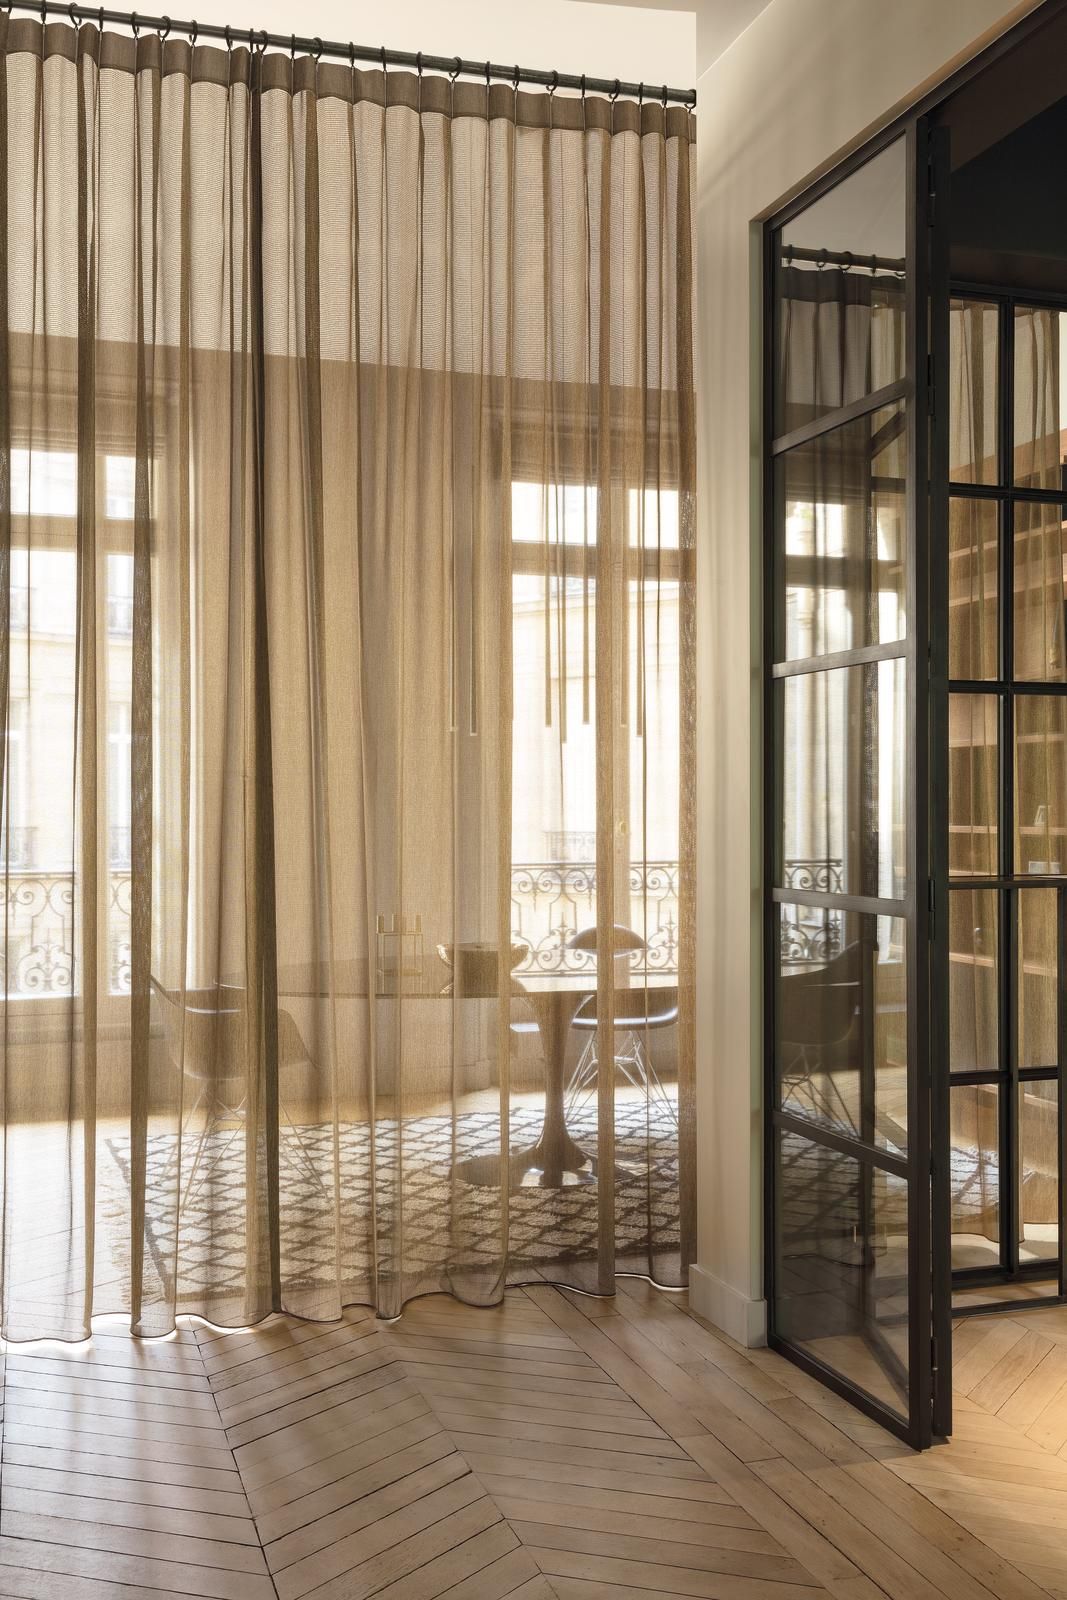 Advantages and disadvantages of a room
divider curtain